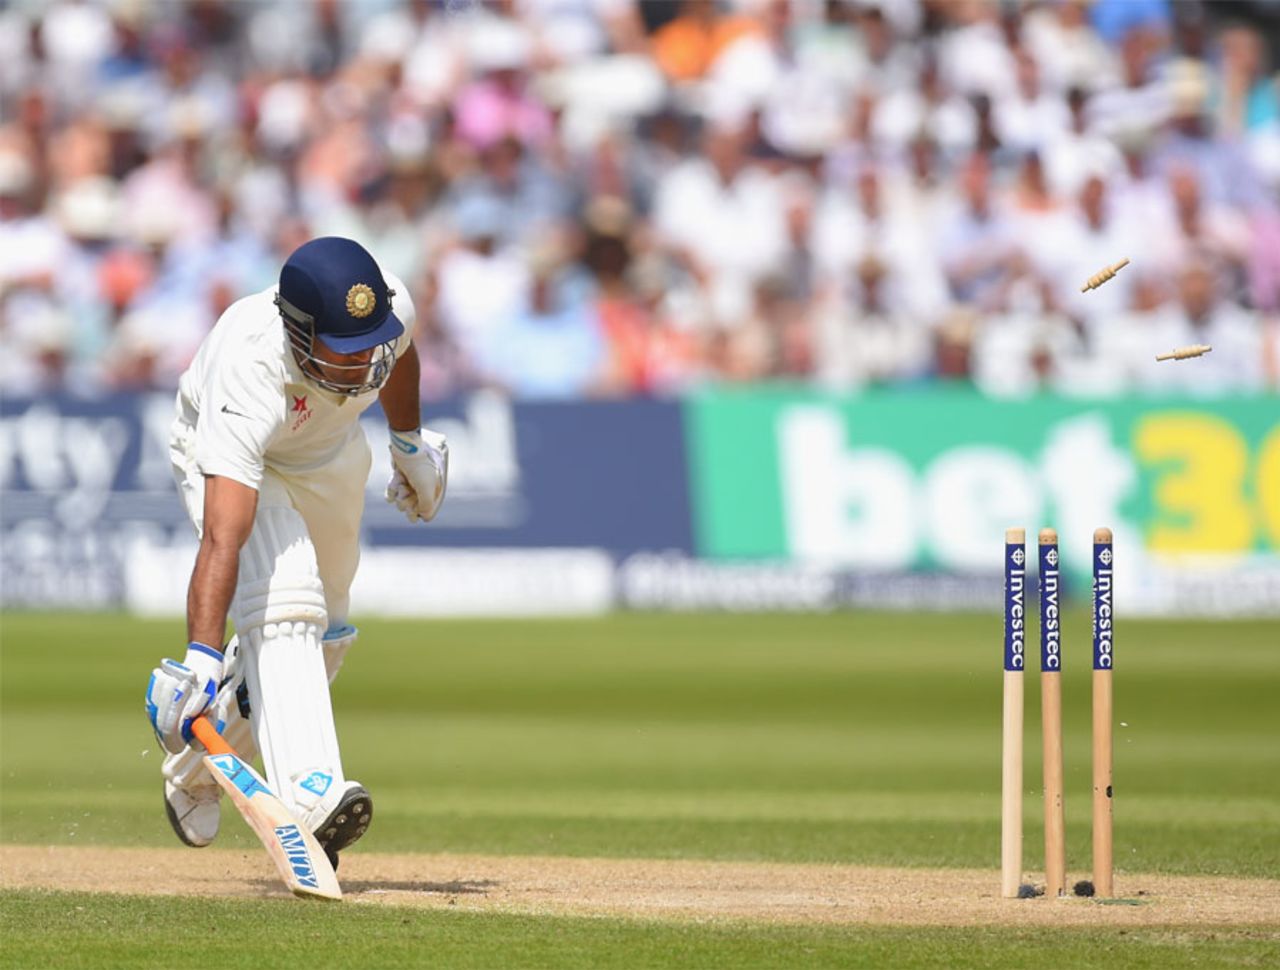 MS Dhoni was a little lazy and was run out, England v India, 1st Investec Test, Trent Bridge, 2nd day, July 10, 2014